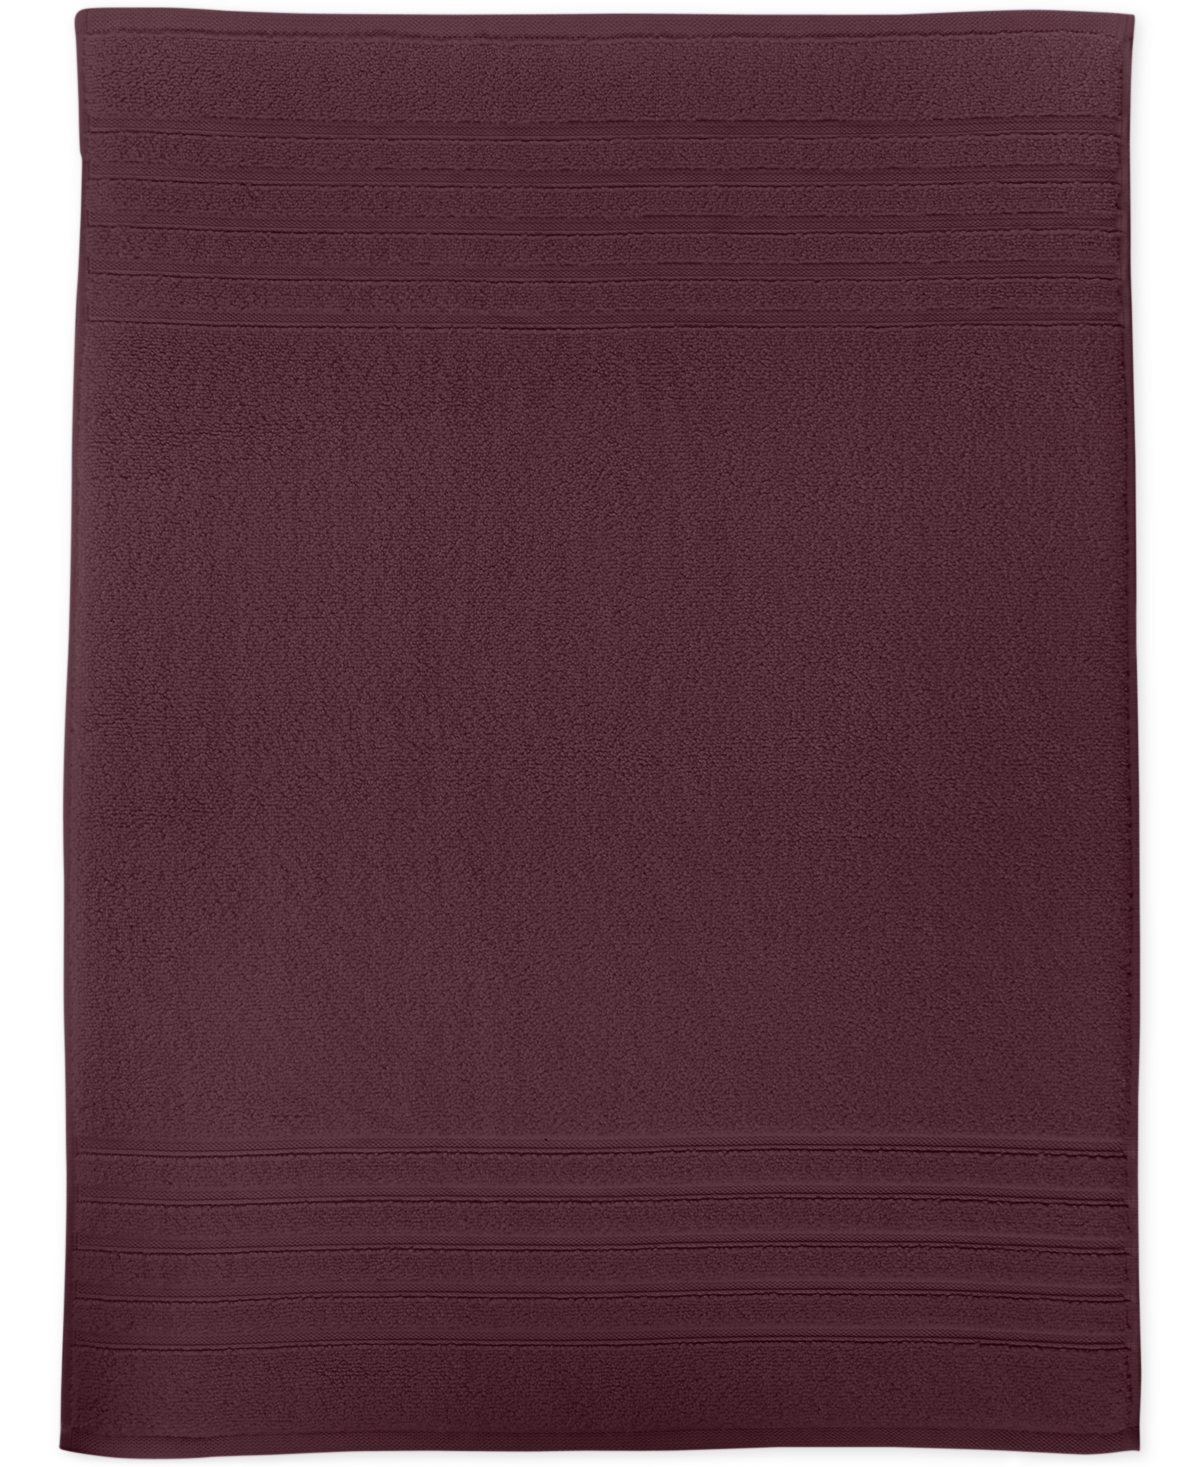 Hotel Collection Ultimate MicroCotton 26 x 34 Tub Mat, Created for Macy's - Lake